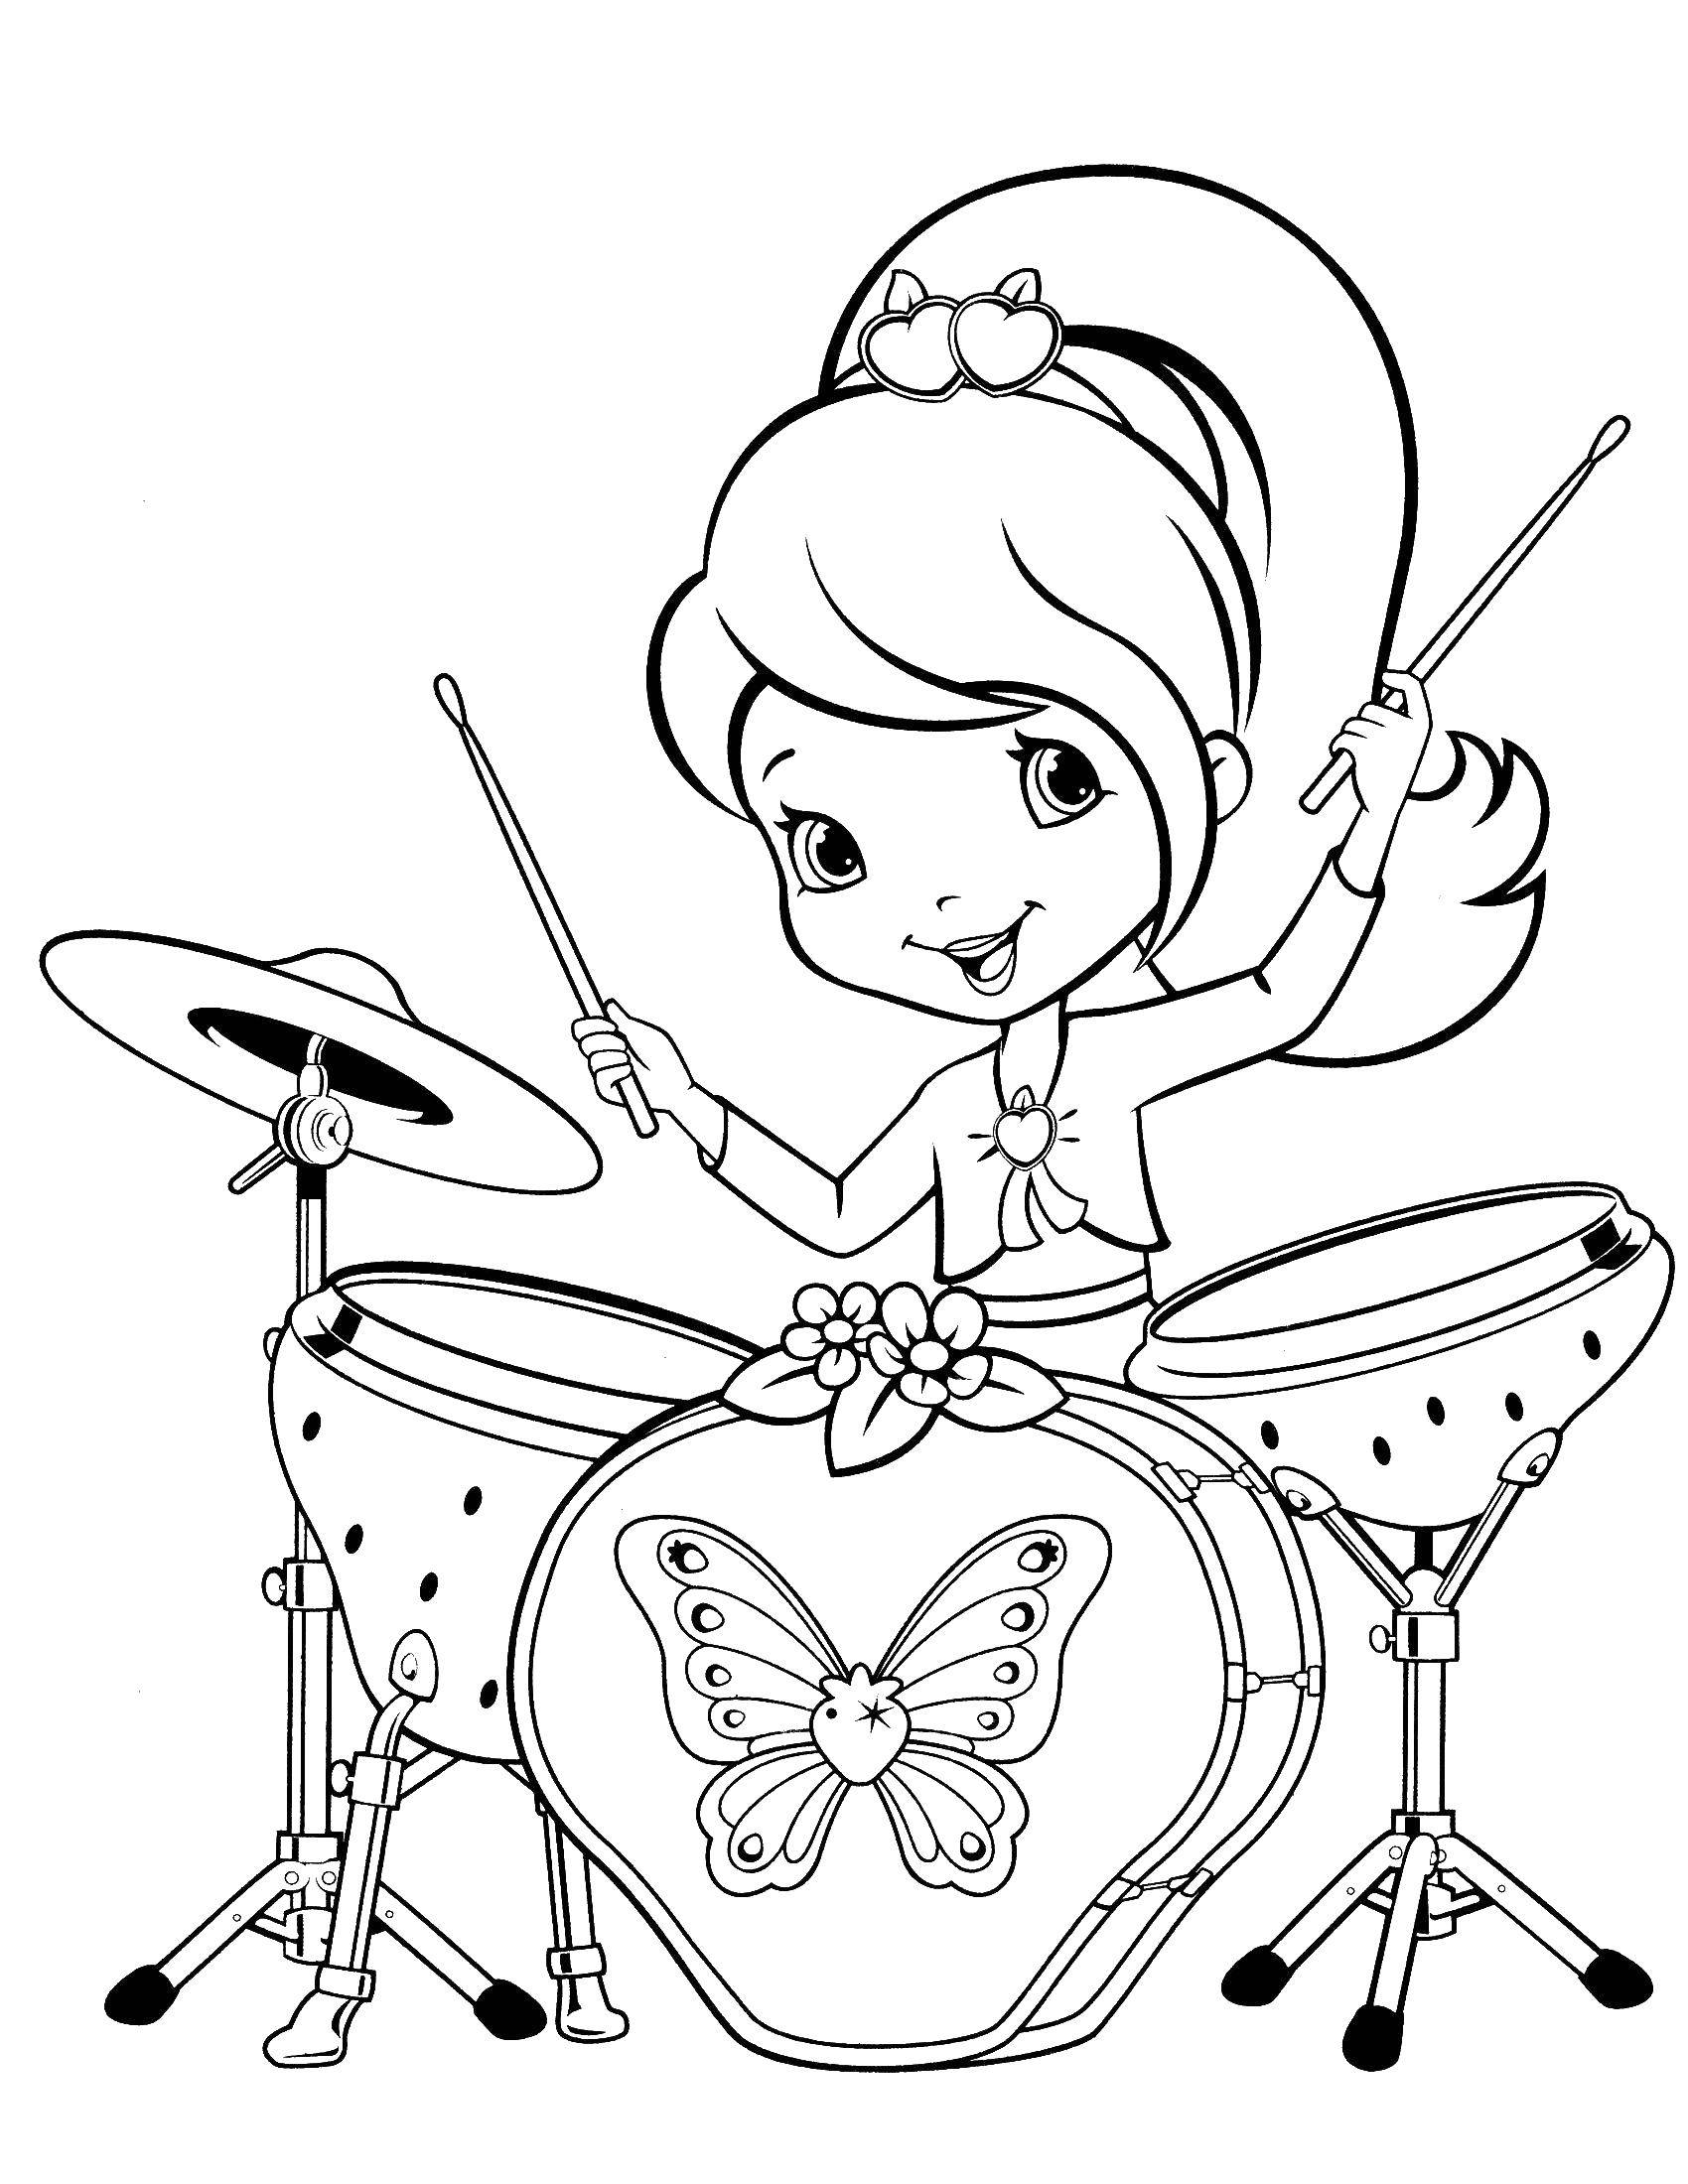 Coloring Charlotte strawberry plays the drums. Category Charlotte zemlyanichka cartoons. Tags:  Charlotte, strawberry.